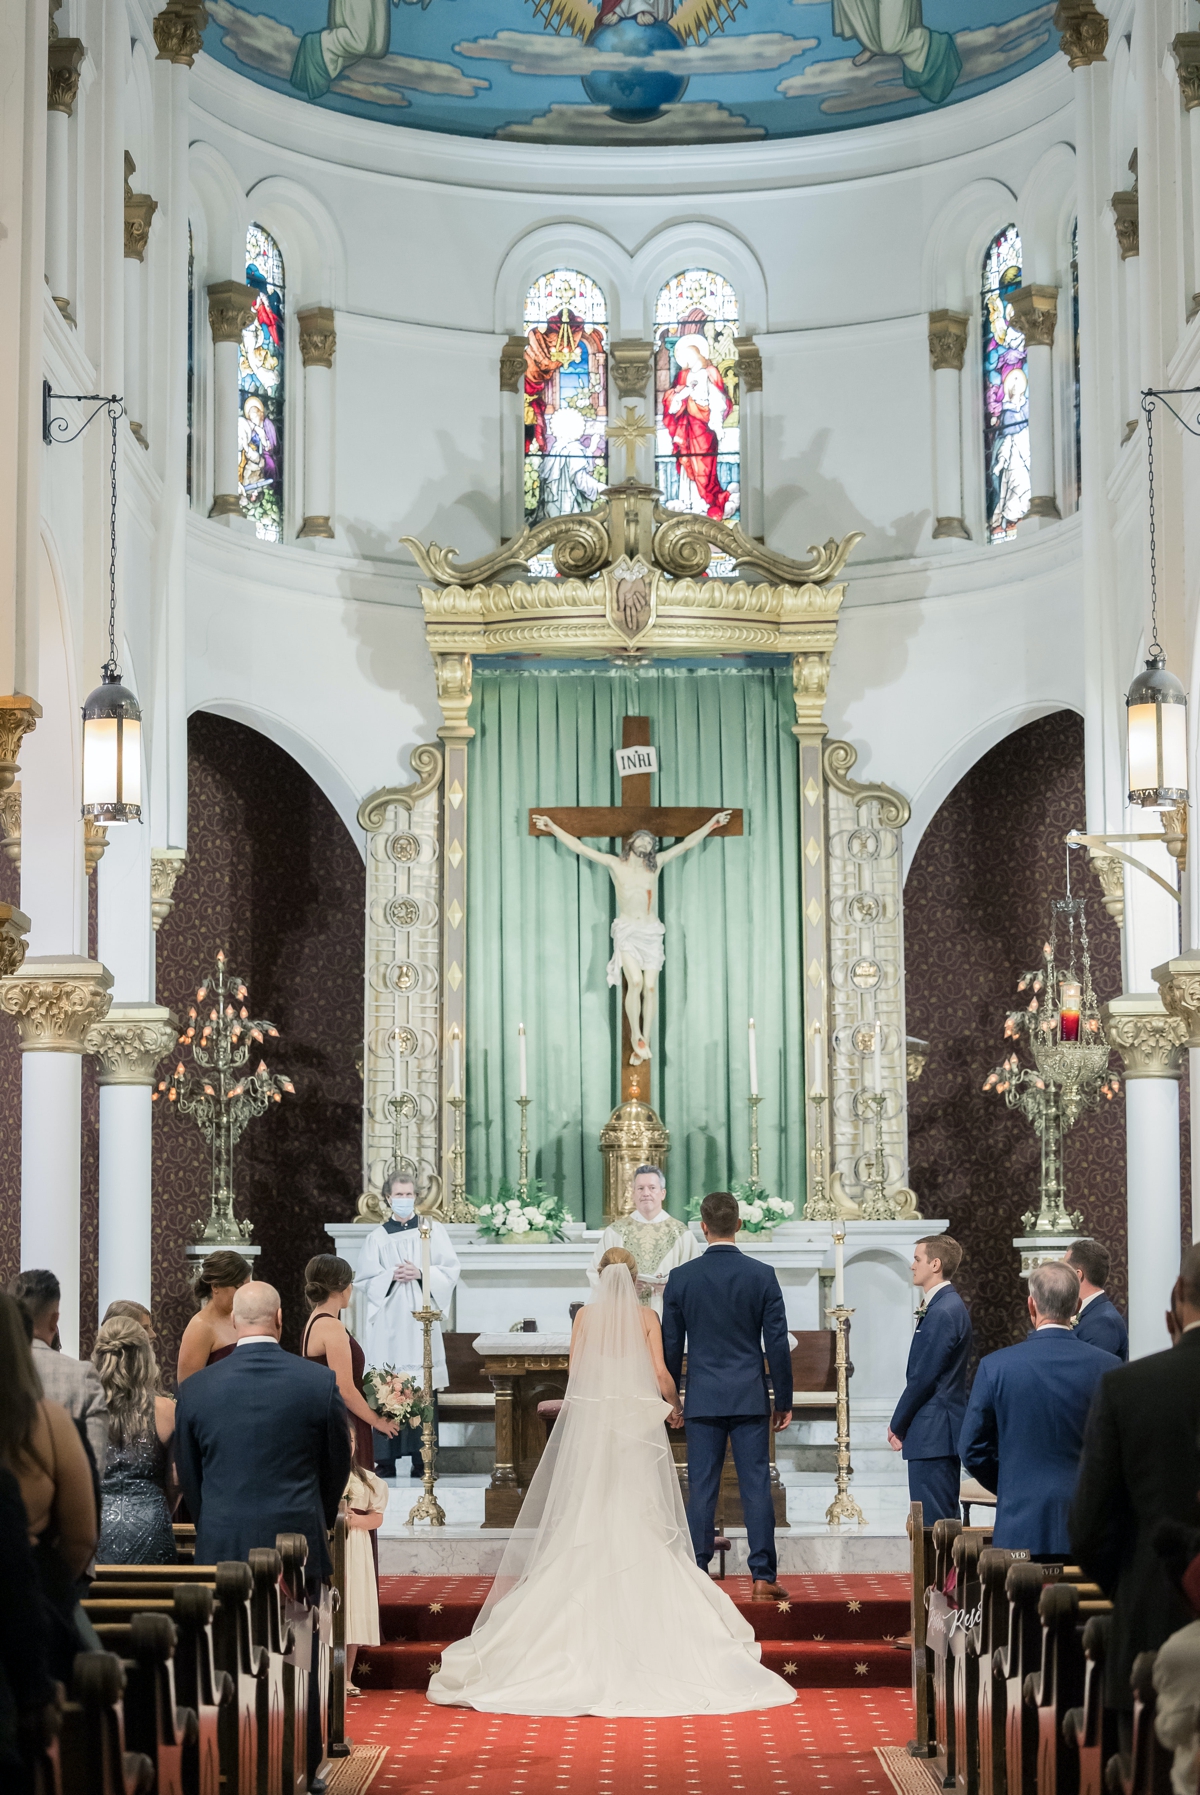 Rebecca and Josh standing at the altar of a Catholic church during their wedding ceremony.